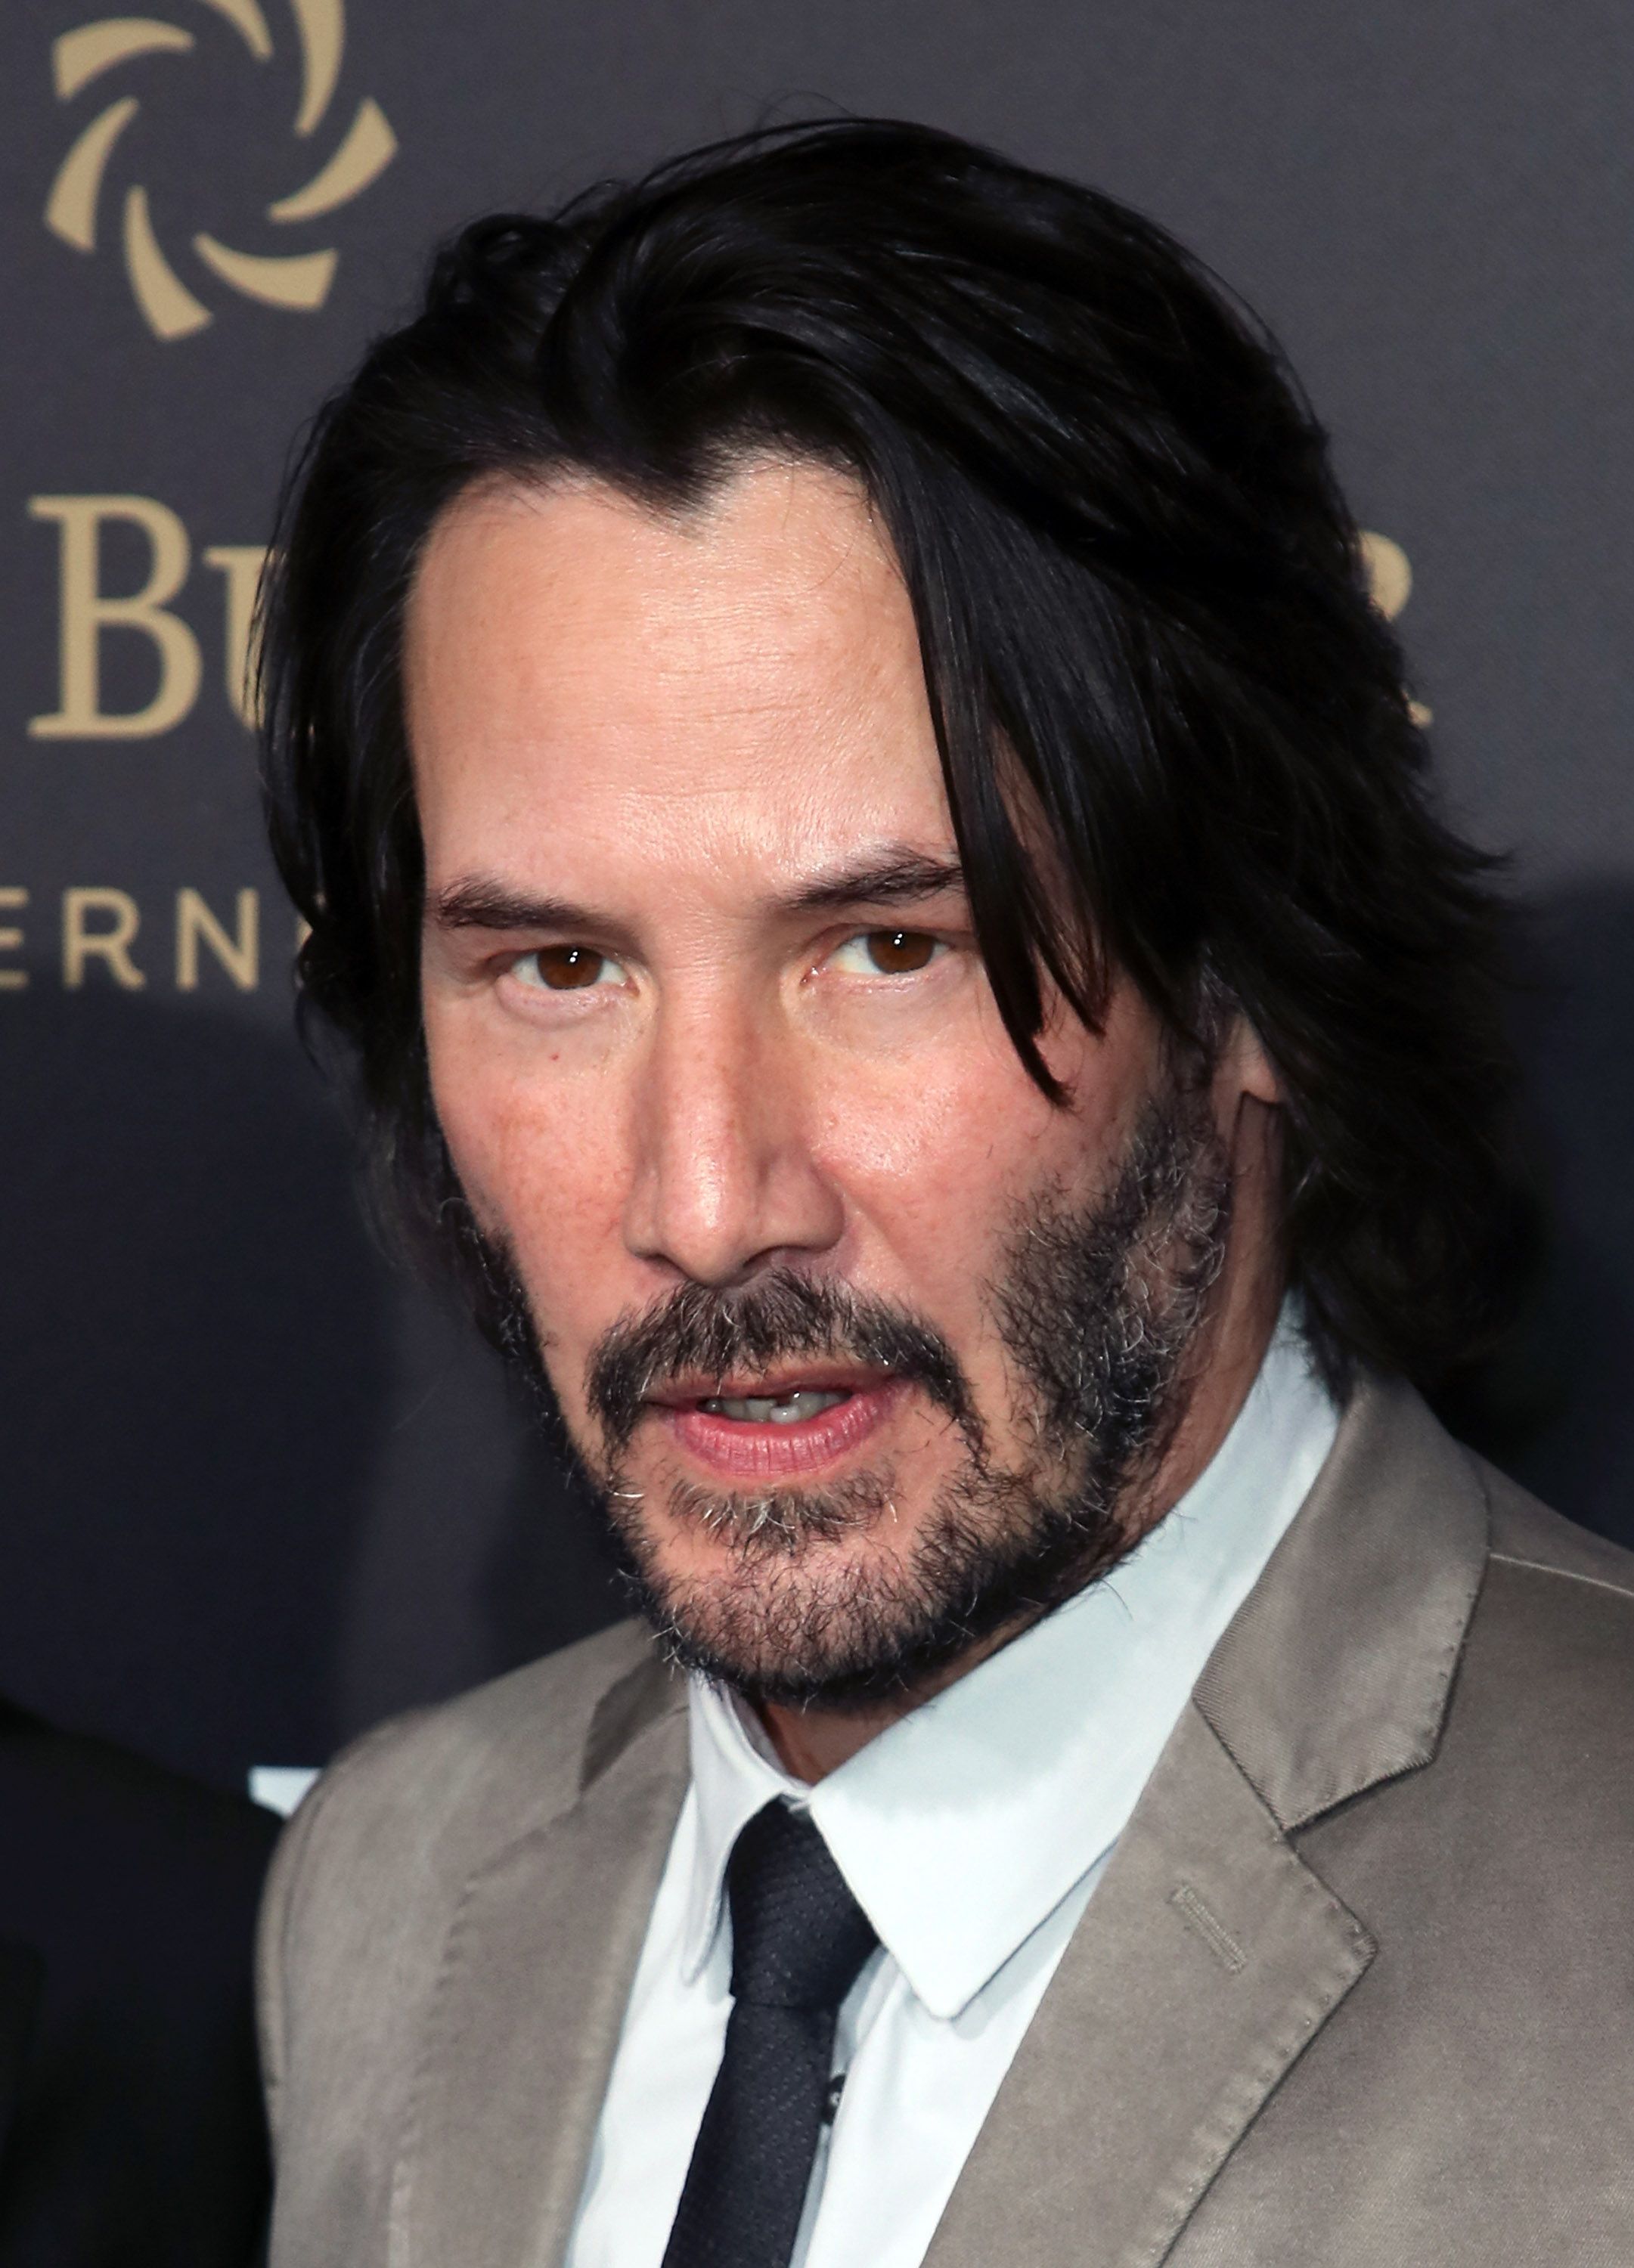 Keanu Reeves during the premiere of Summit Entertainment's "John Wick: Chapter Two" at ArcLight Hollywood on January 30, 2017 in Hollywood, California. | Source: Getty Images